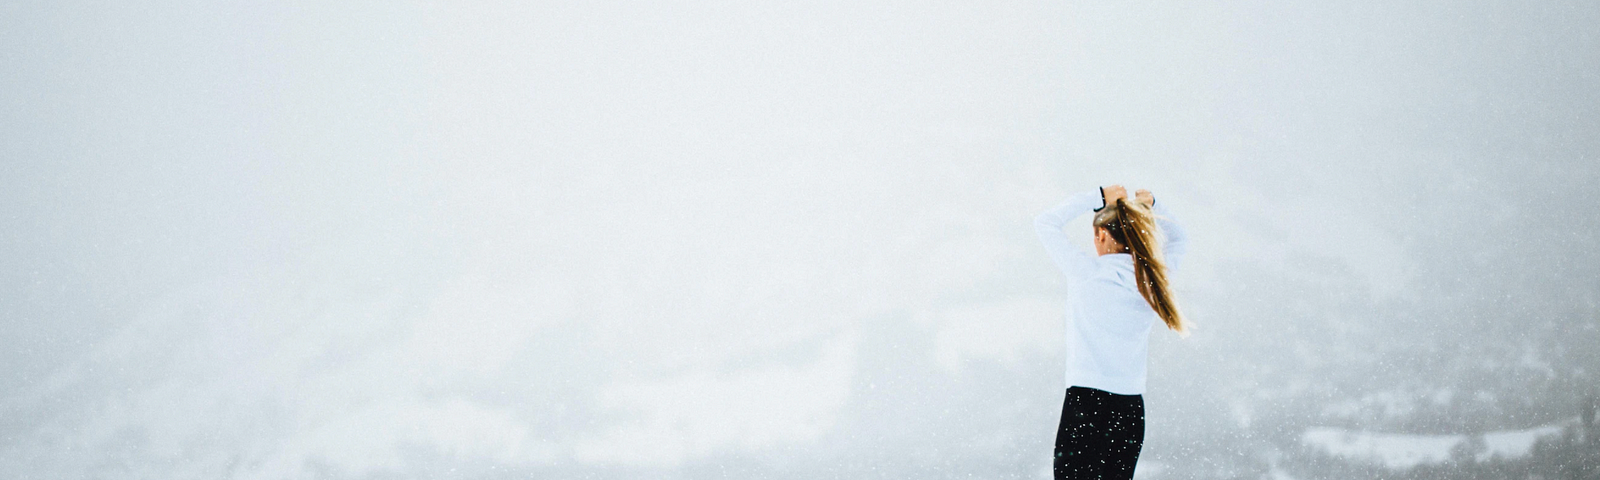 A woman standing in snow and looking out a snowy landscape.